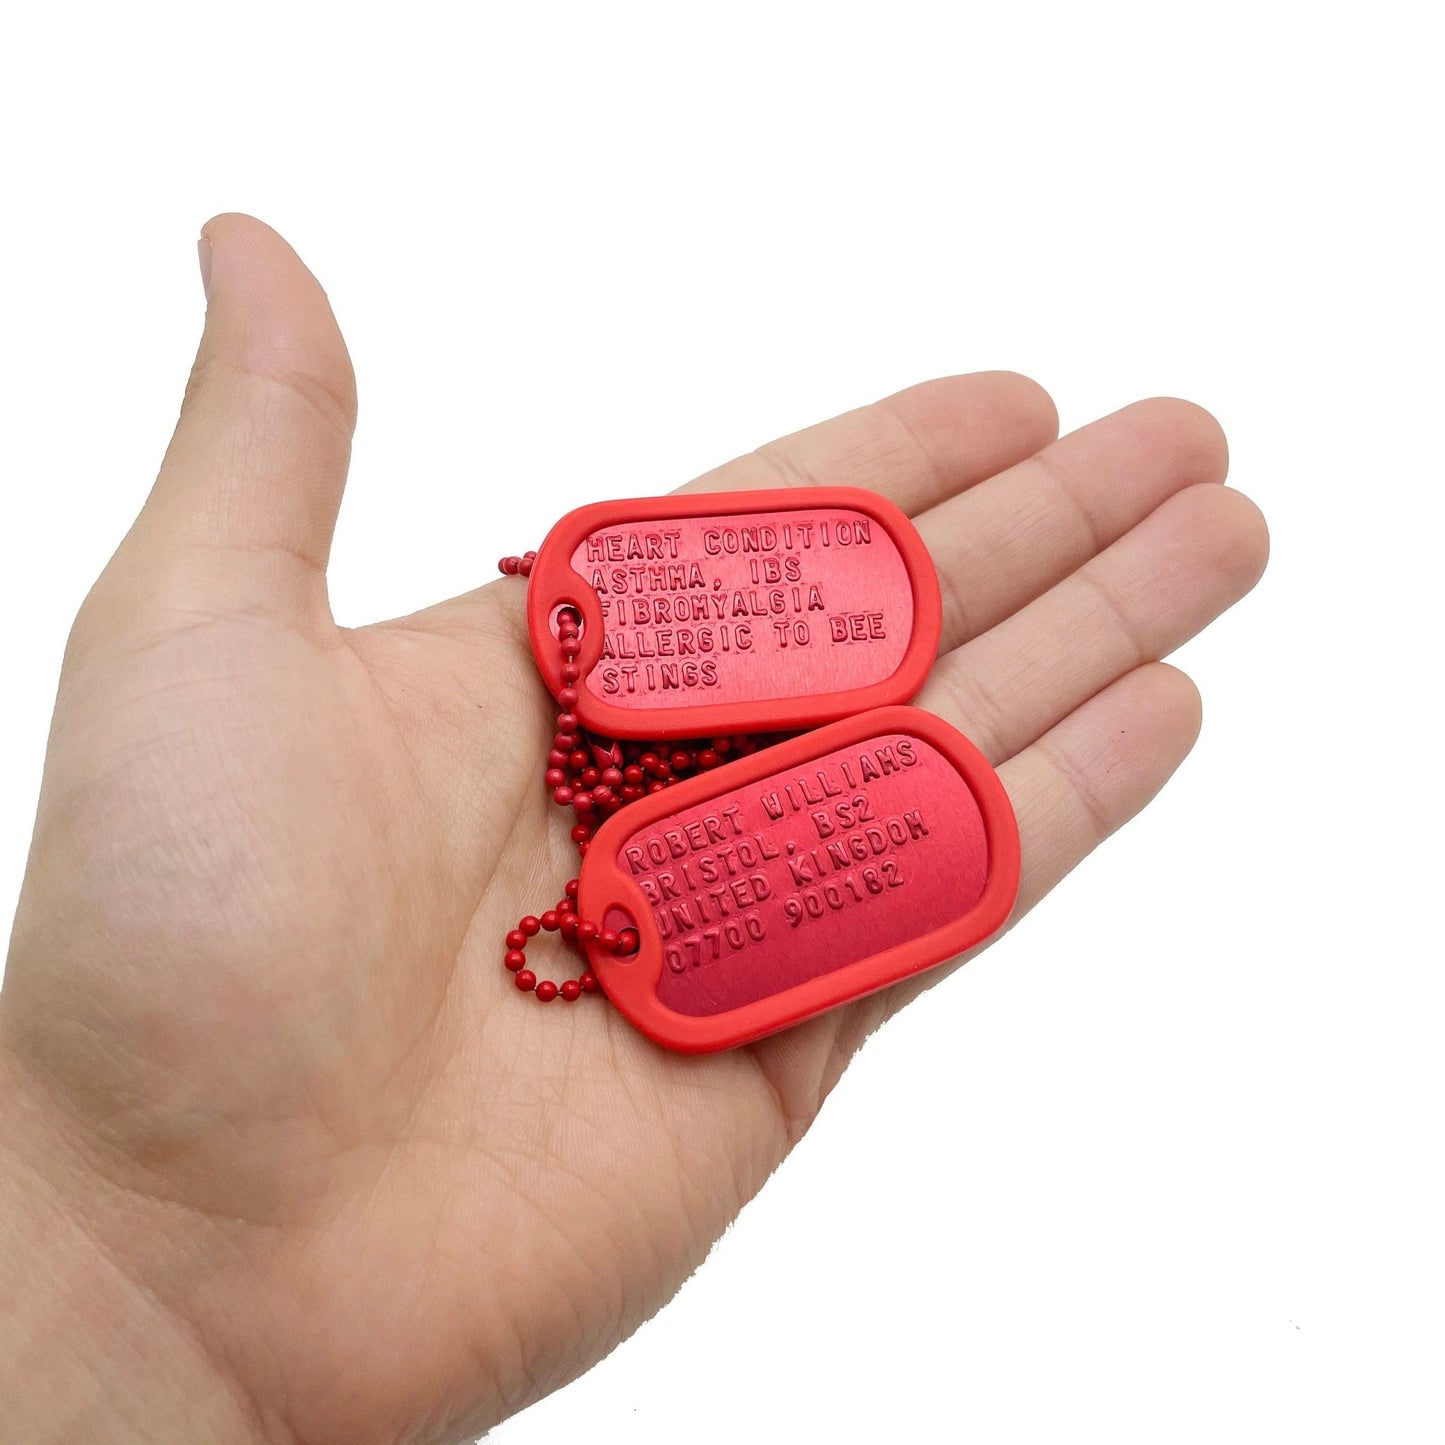 U.s. military set personalised army dog tags red anodized aluminium - chain & silencer included - made to order - TheDogTagCo